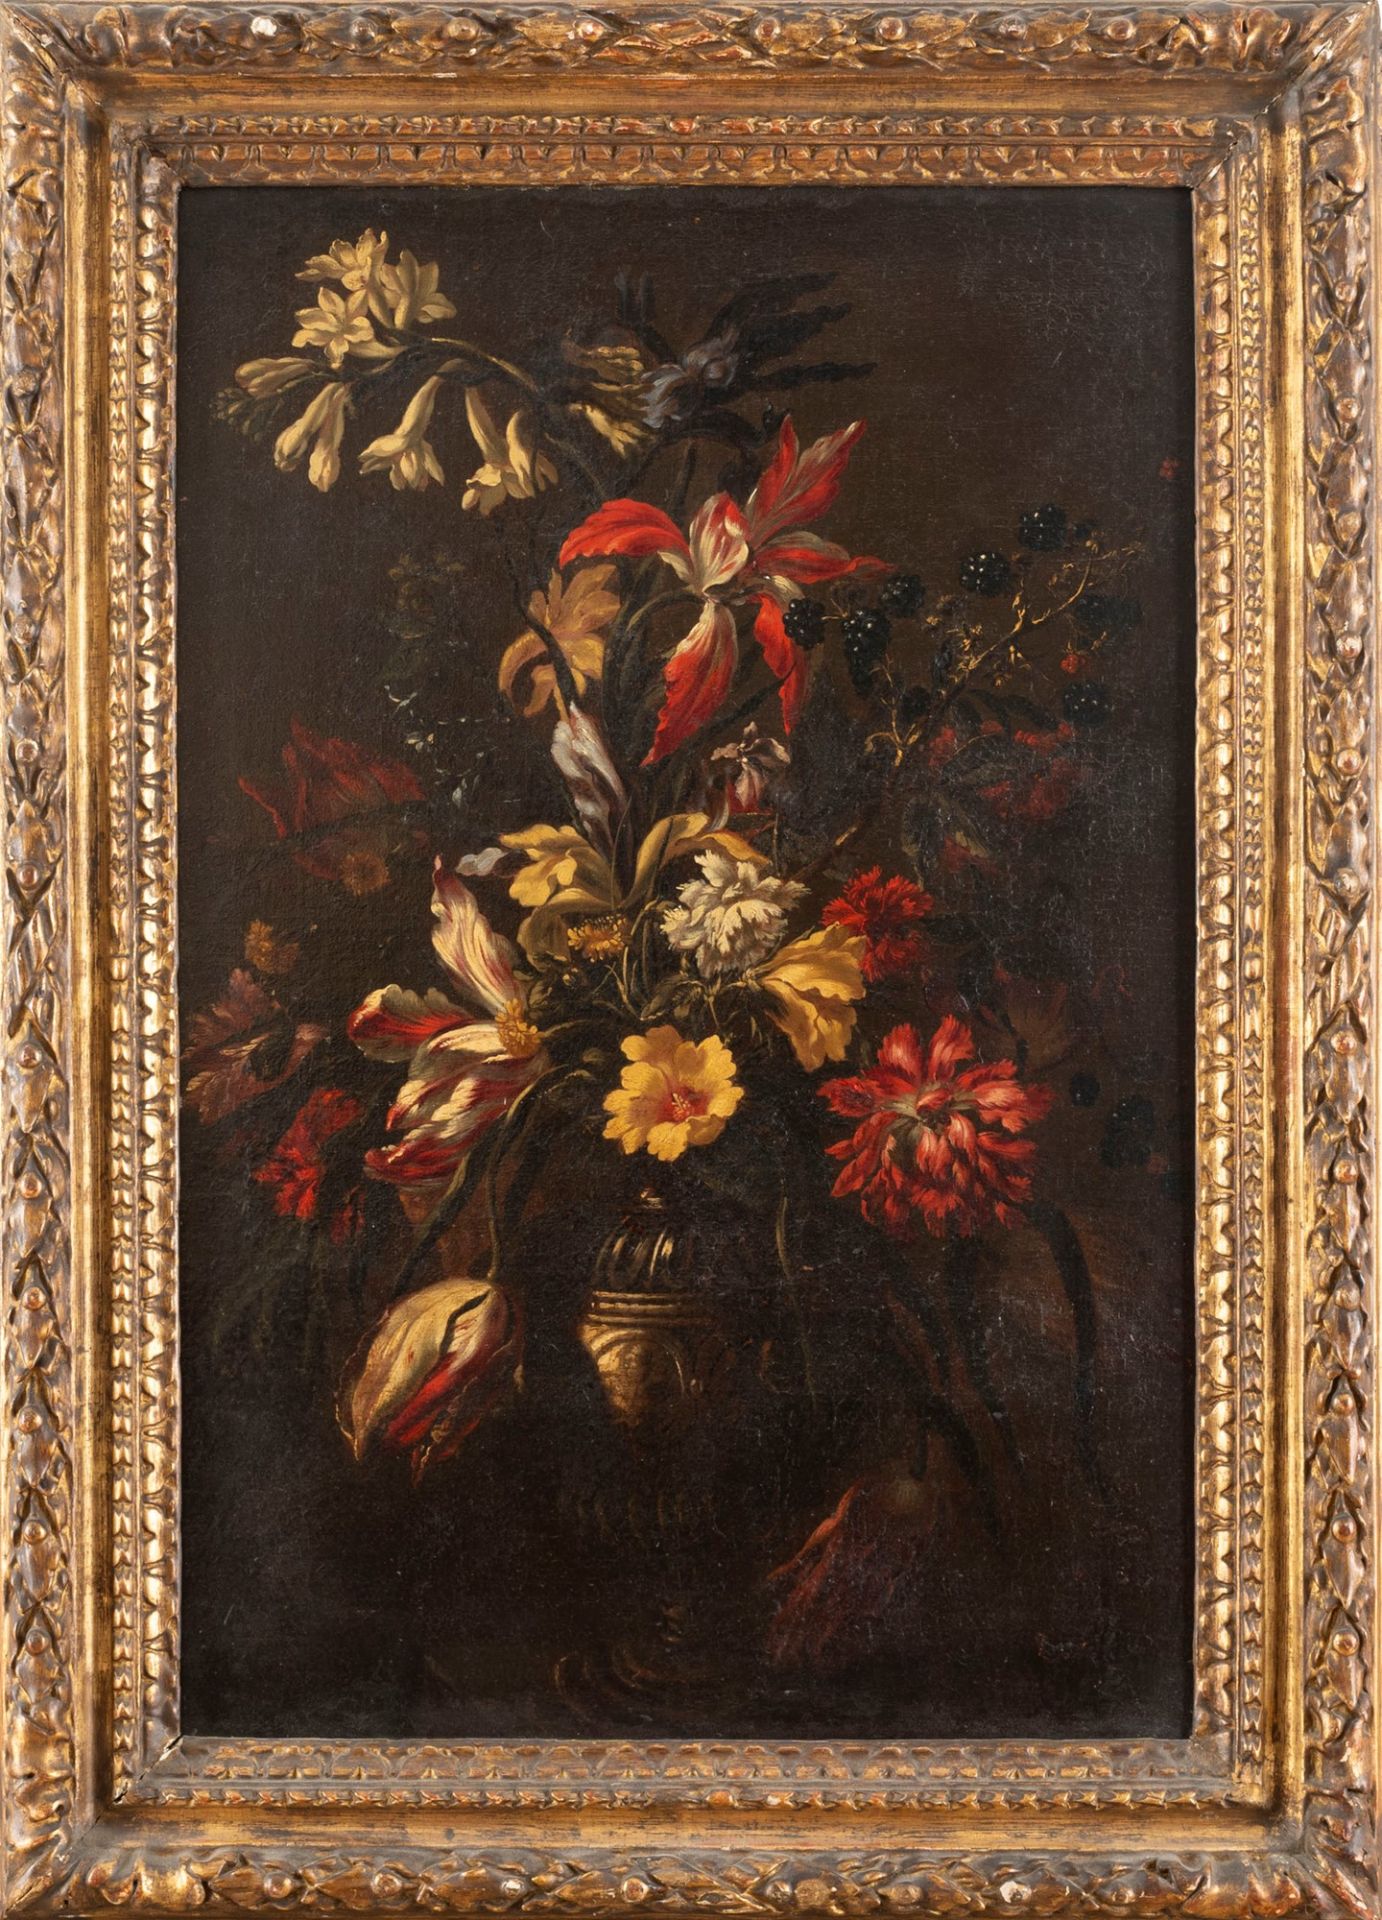 Circle by Francesco Caldei (Mantua, c. 1584 – Venice, 1674) - Flowerpot with tulips and carnations - Image 2 of 3